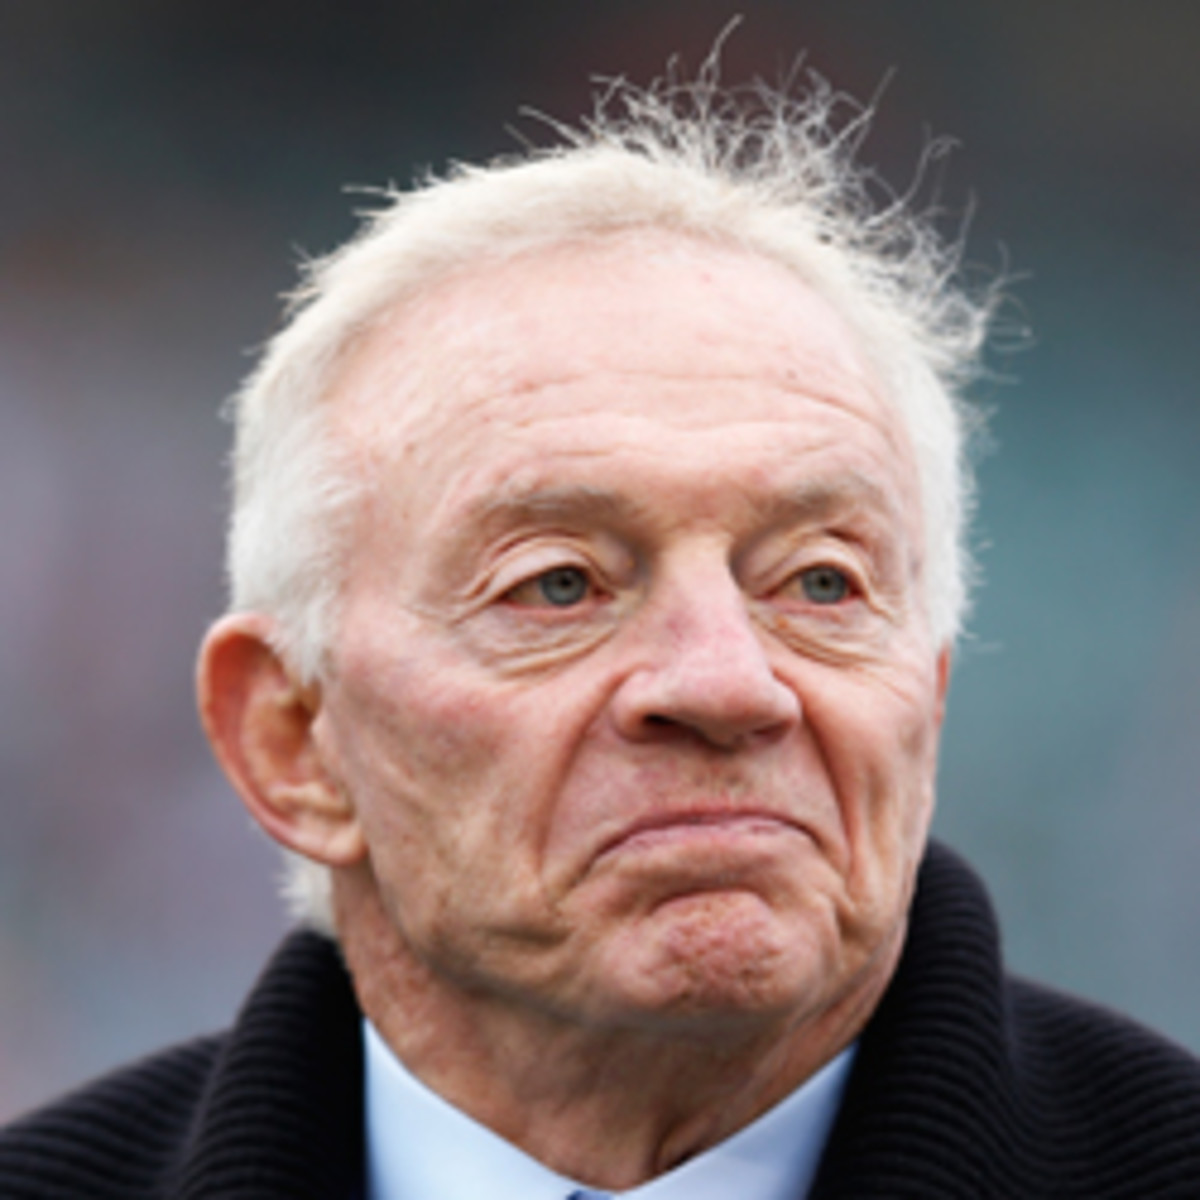 Cowboys owner Jerry Jones says his team is not run like a country club. (Joe Robbins/Getty Images)